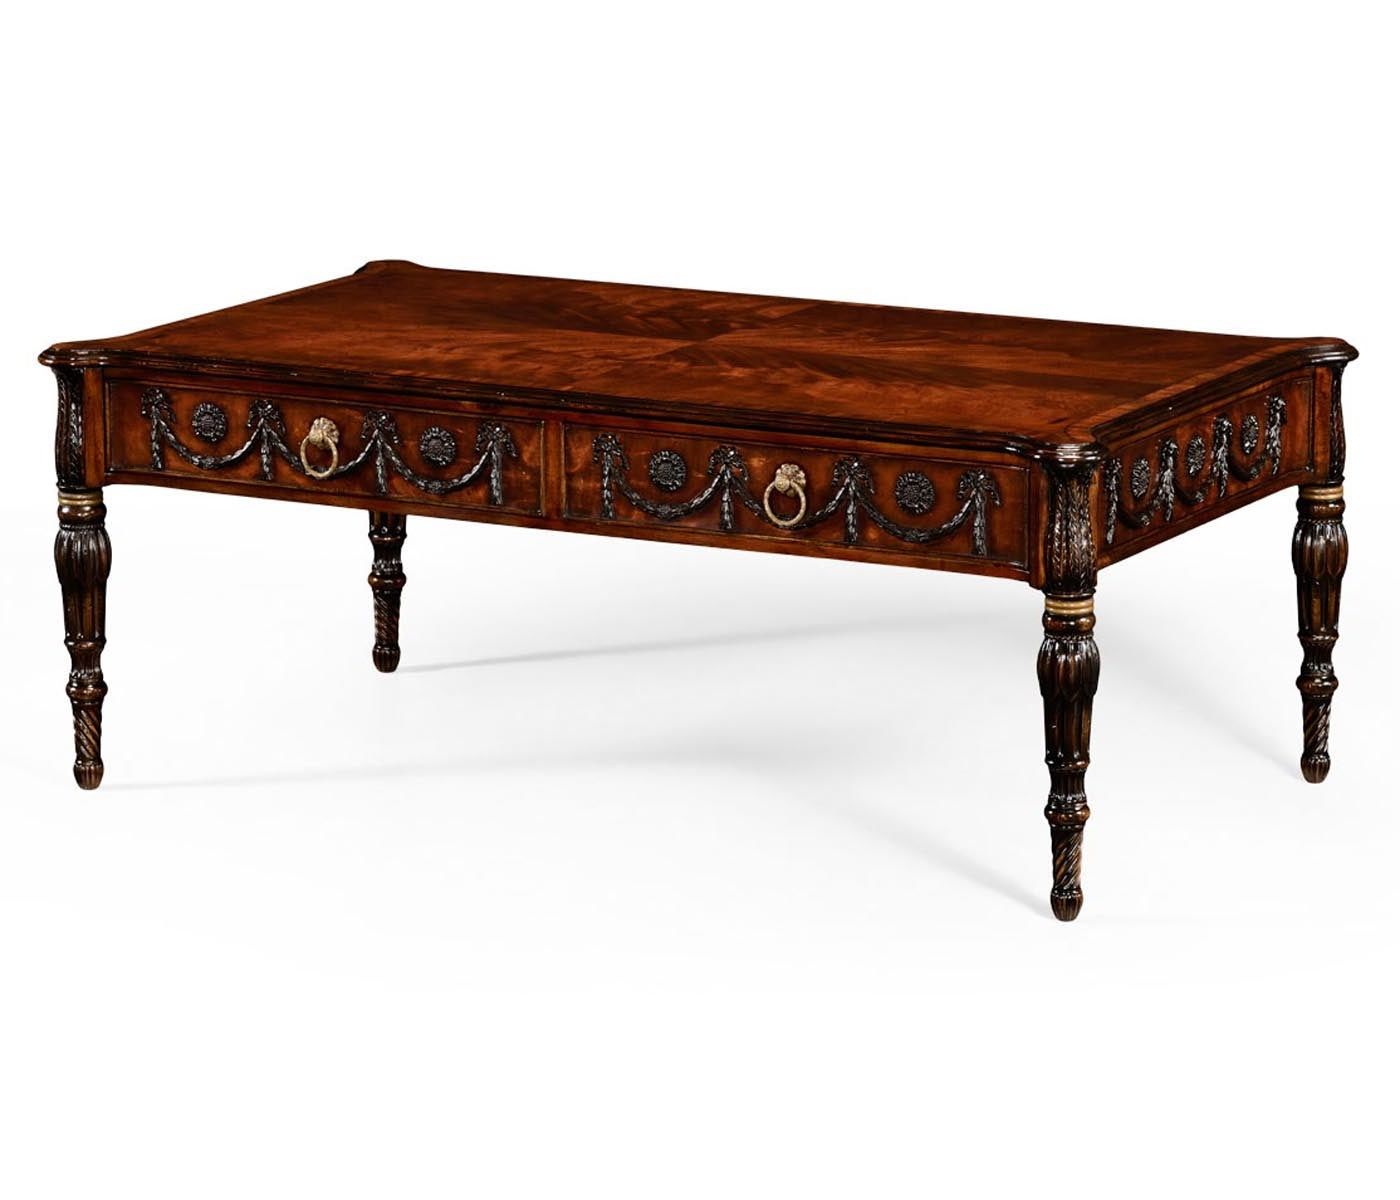 Neo Classical Adam Style Mahogany Coffee Table Pertaining To Preferred Adam Coffee Tables (View 7 of 20)